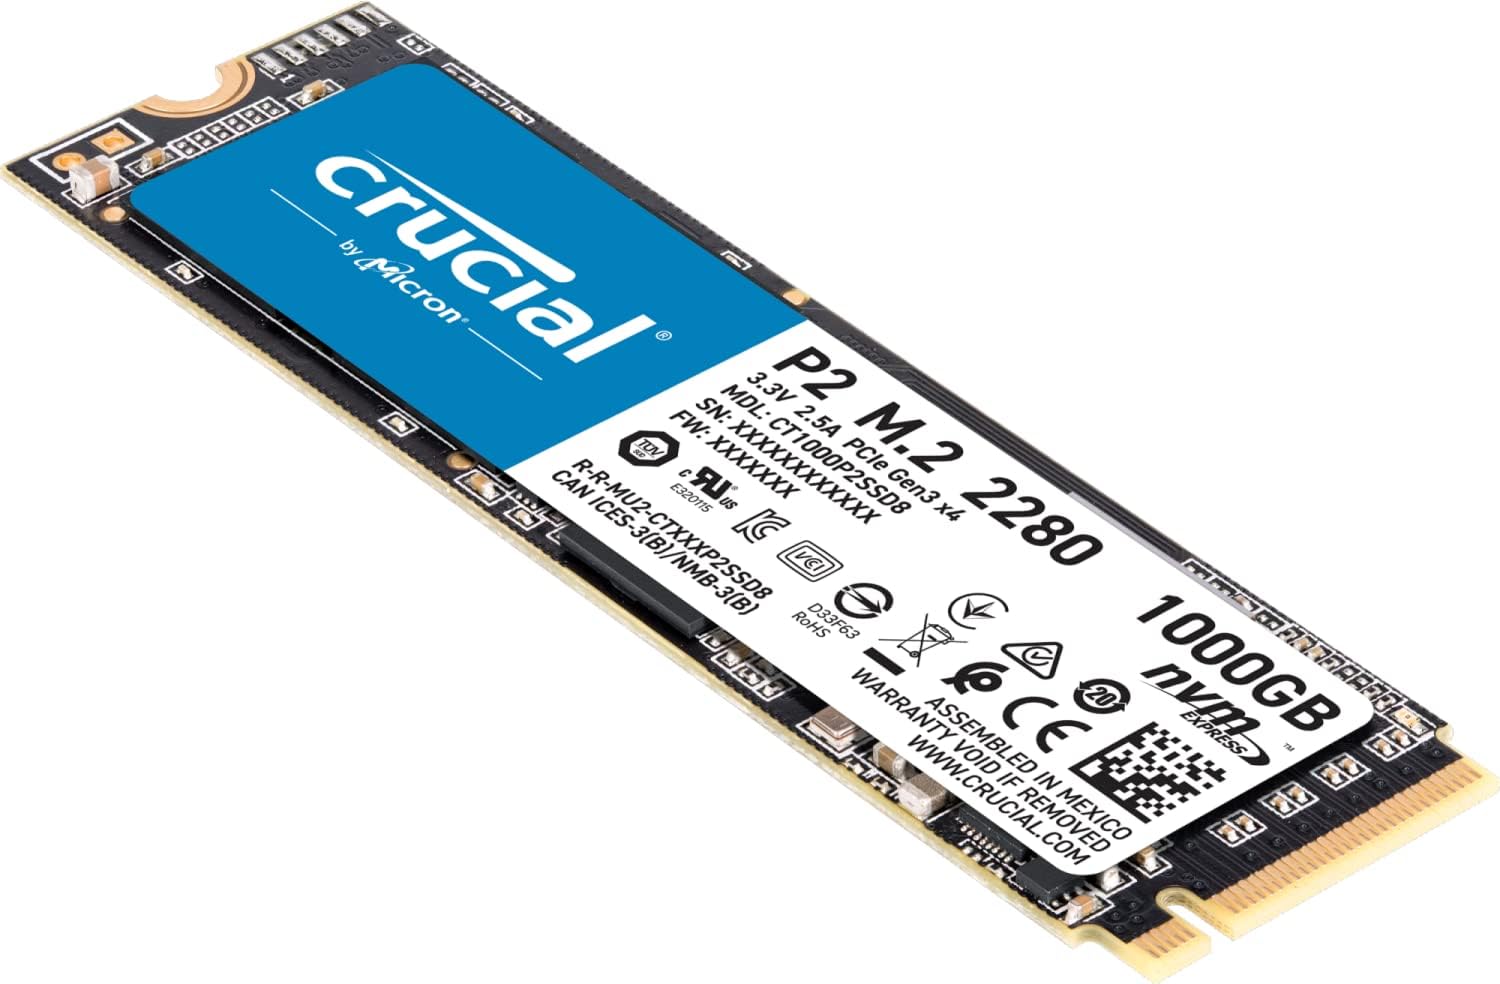 CT1000P2SSD8 - Crucial P2 SSD in sleek black color, 1TB capacity for ample storage 6221243292050